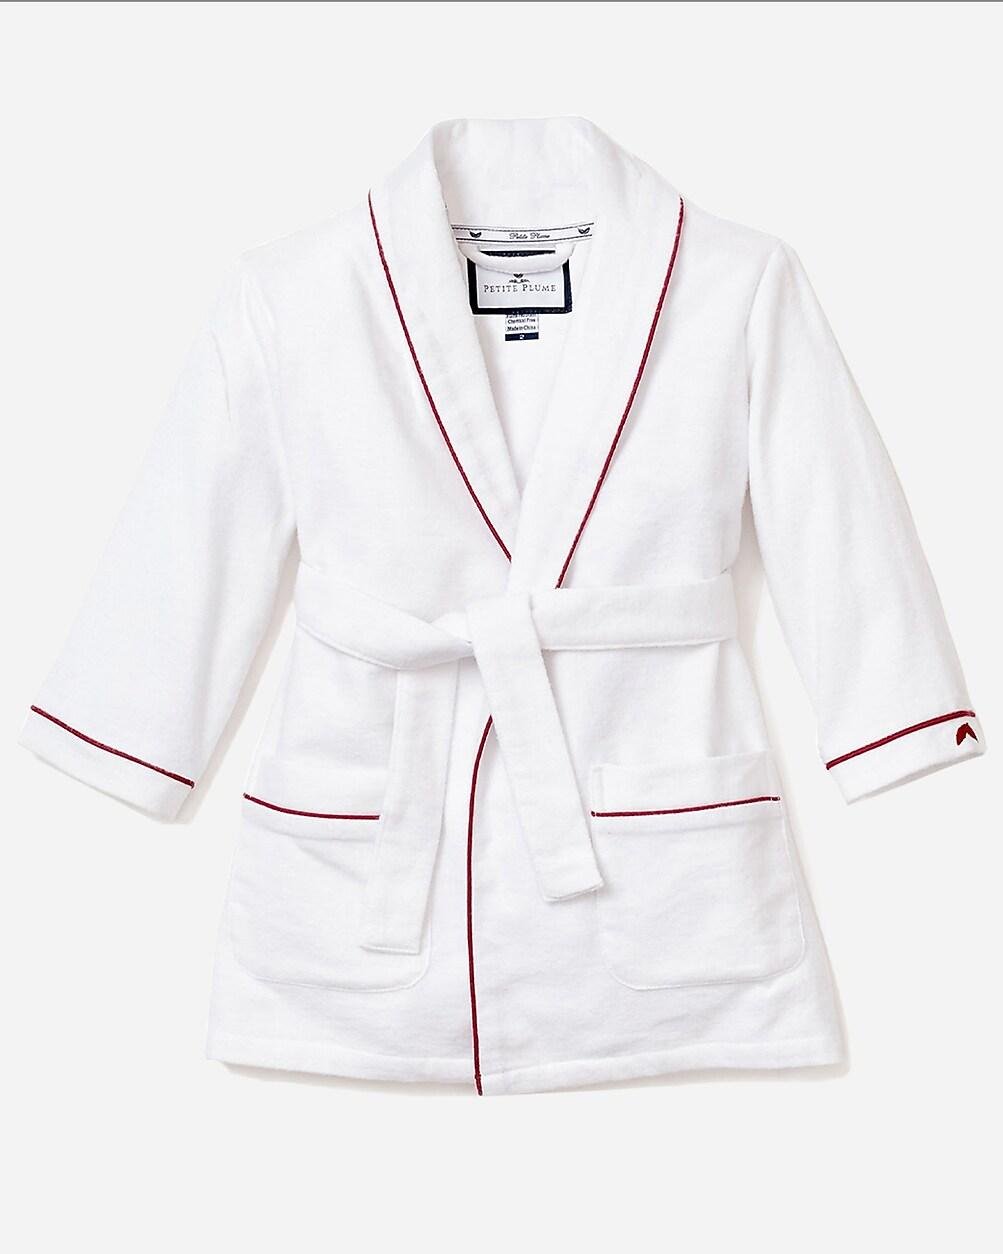 Petite Plume™ kids' flannel robe with piping by J.CREW